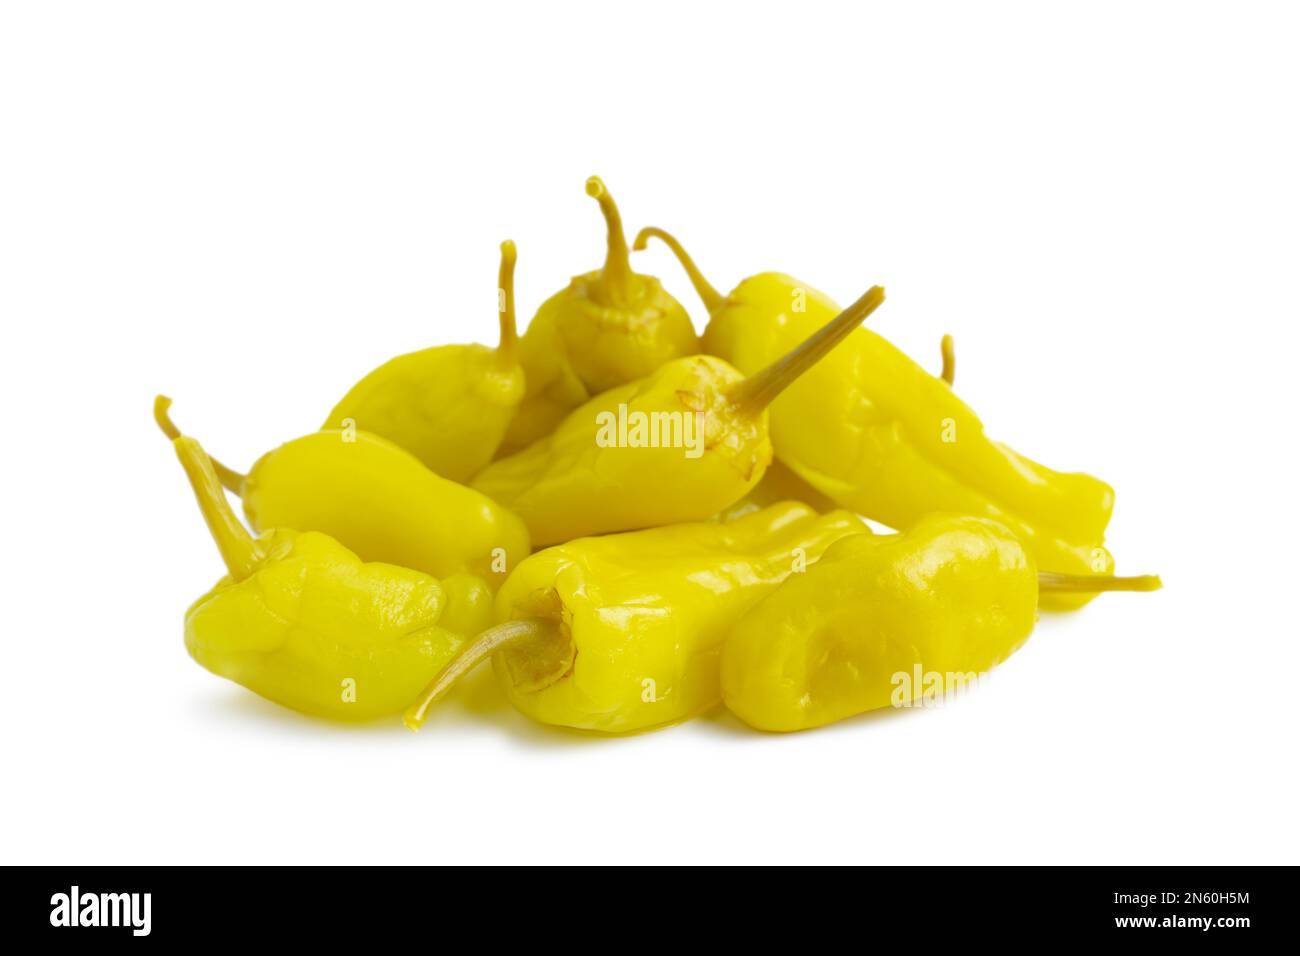 Pile of pickled yellow peppers, pepperoncini or friggitelli isolated on white background. Hot pepper marinated, brined. Traditional Italian and greek Stock Photo